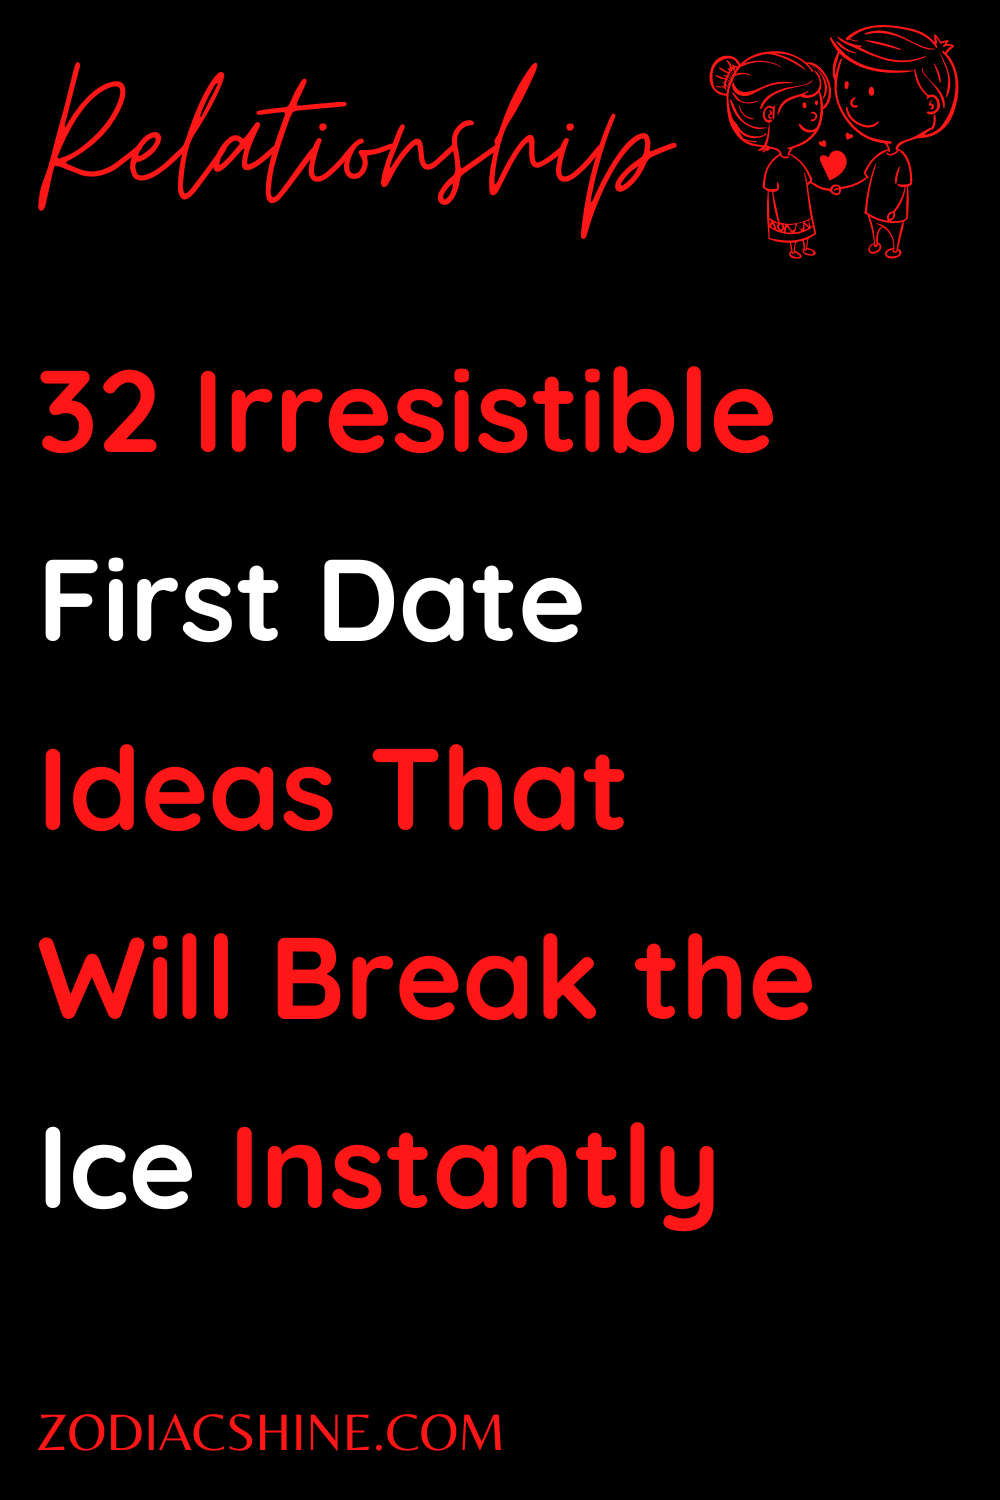 32 Irresistible First Date Ideas That Will Break the Ice Instantly